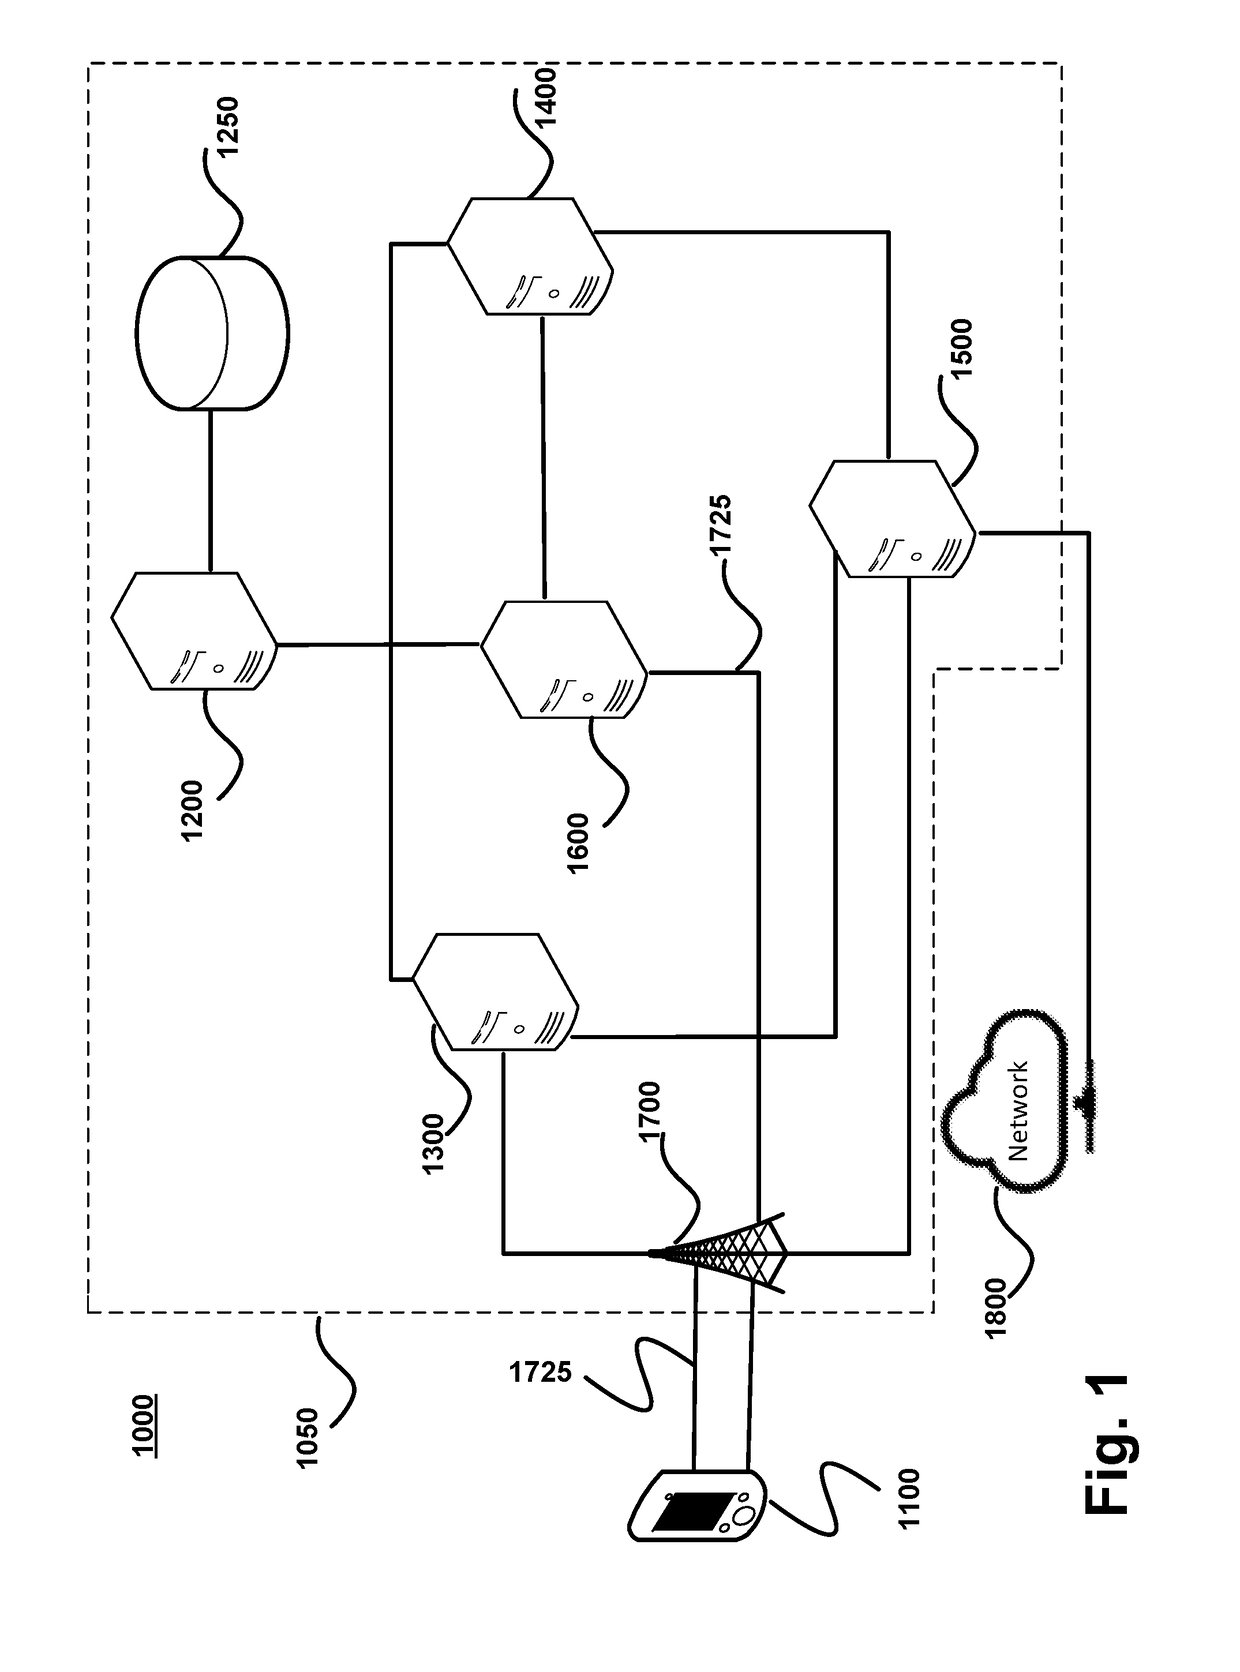 Systems and methods for enhanced mobile data roaming and connectivity